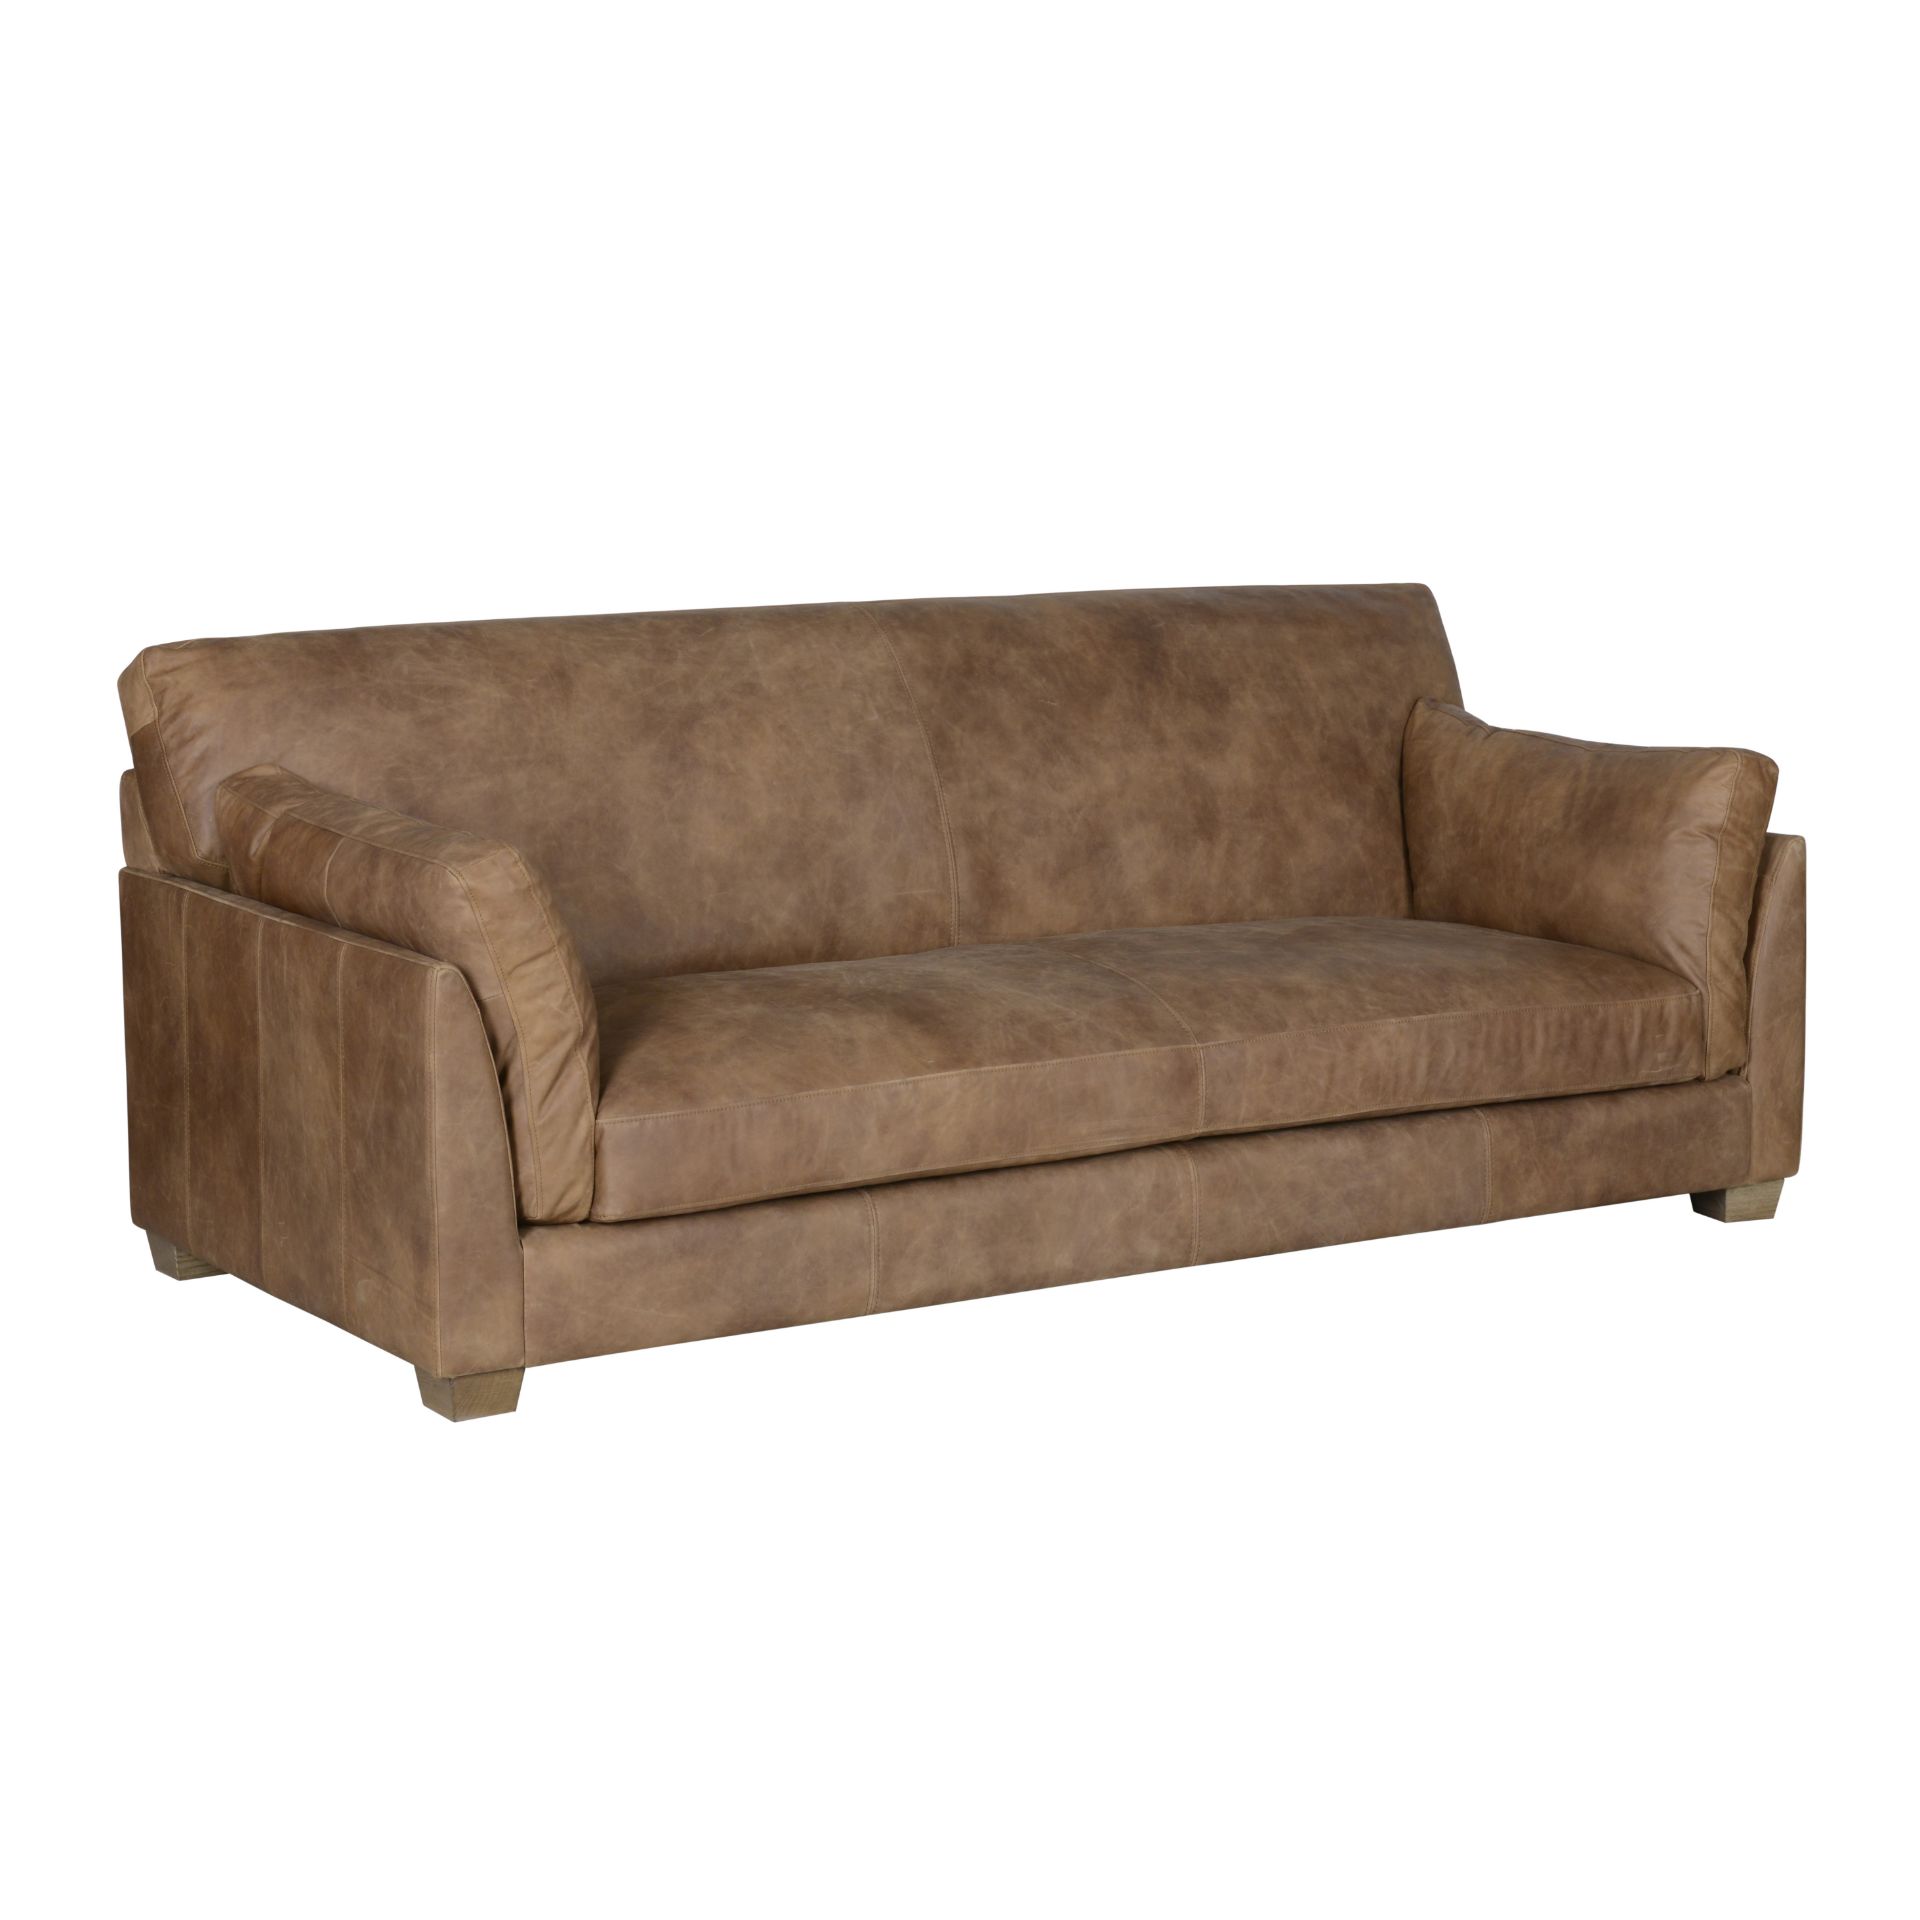 Moore Sofa 3 Seater Natural Wash Camel 213 x 100 x 86cm RRP £2083